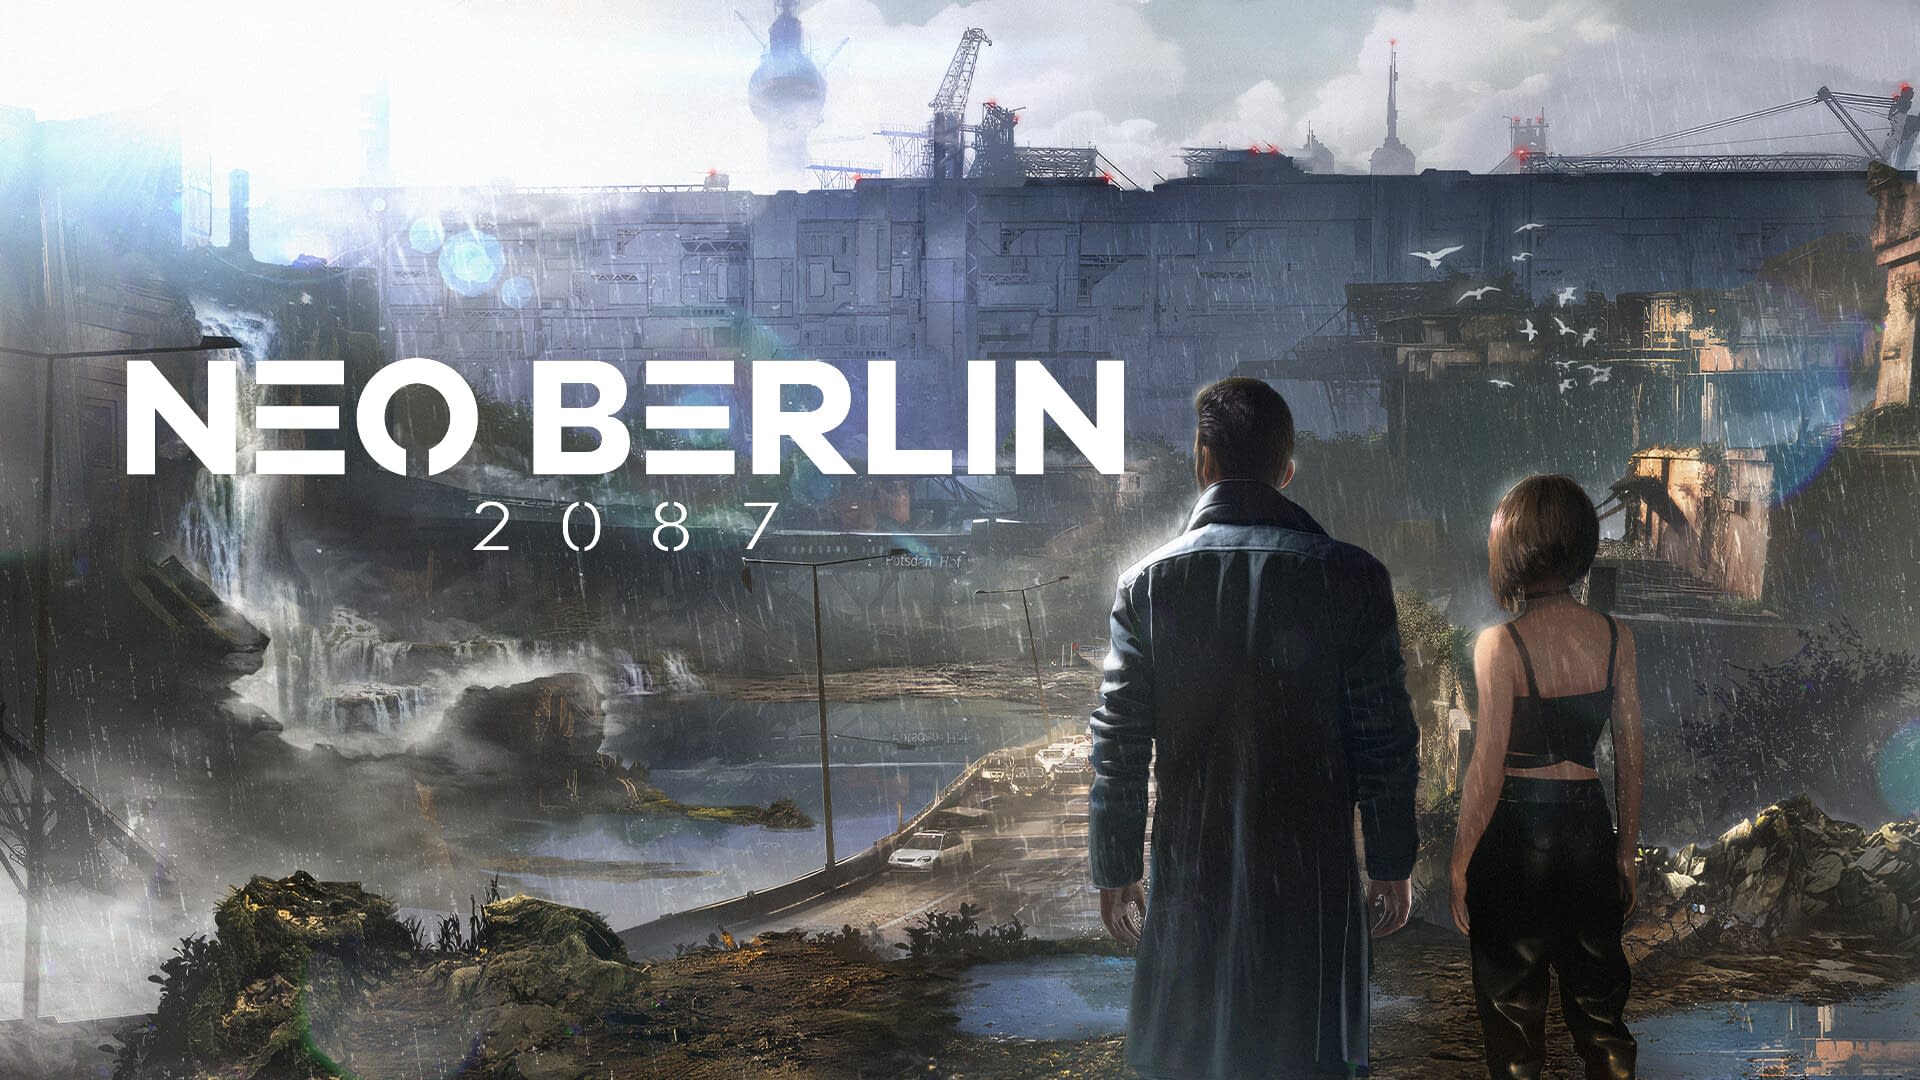 Neo Berlin 2087 for “Play and Play” Fragman Published